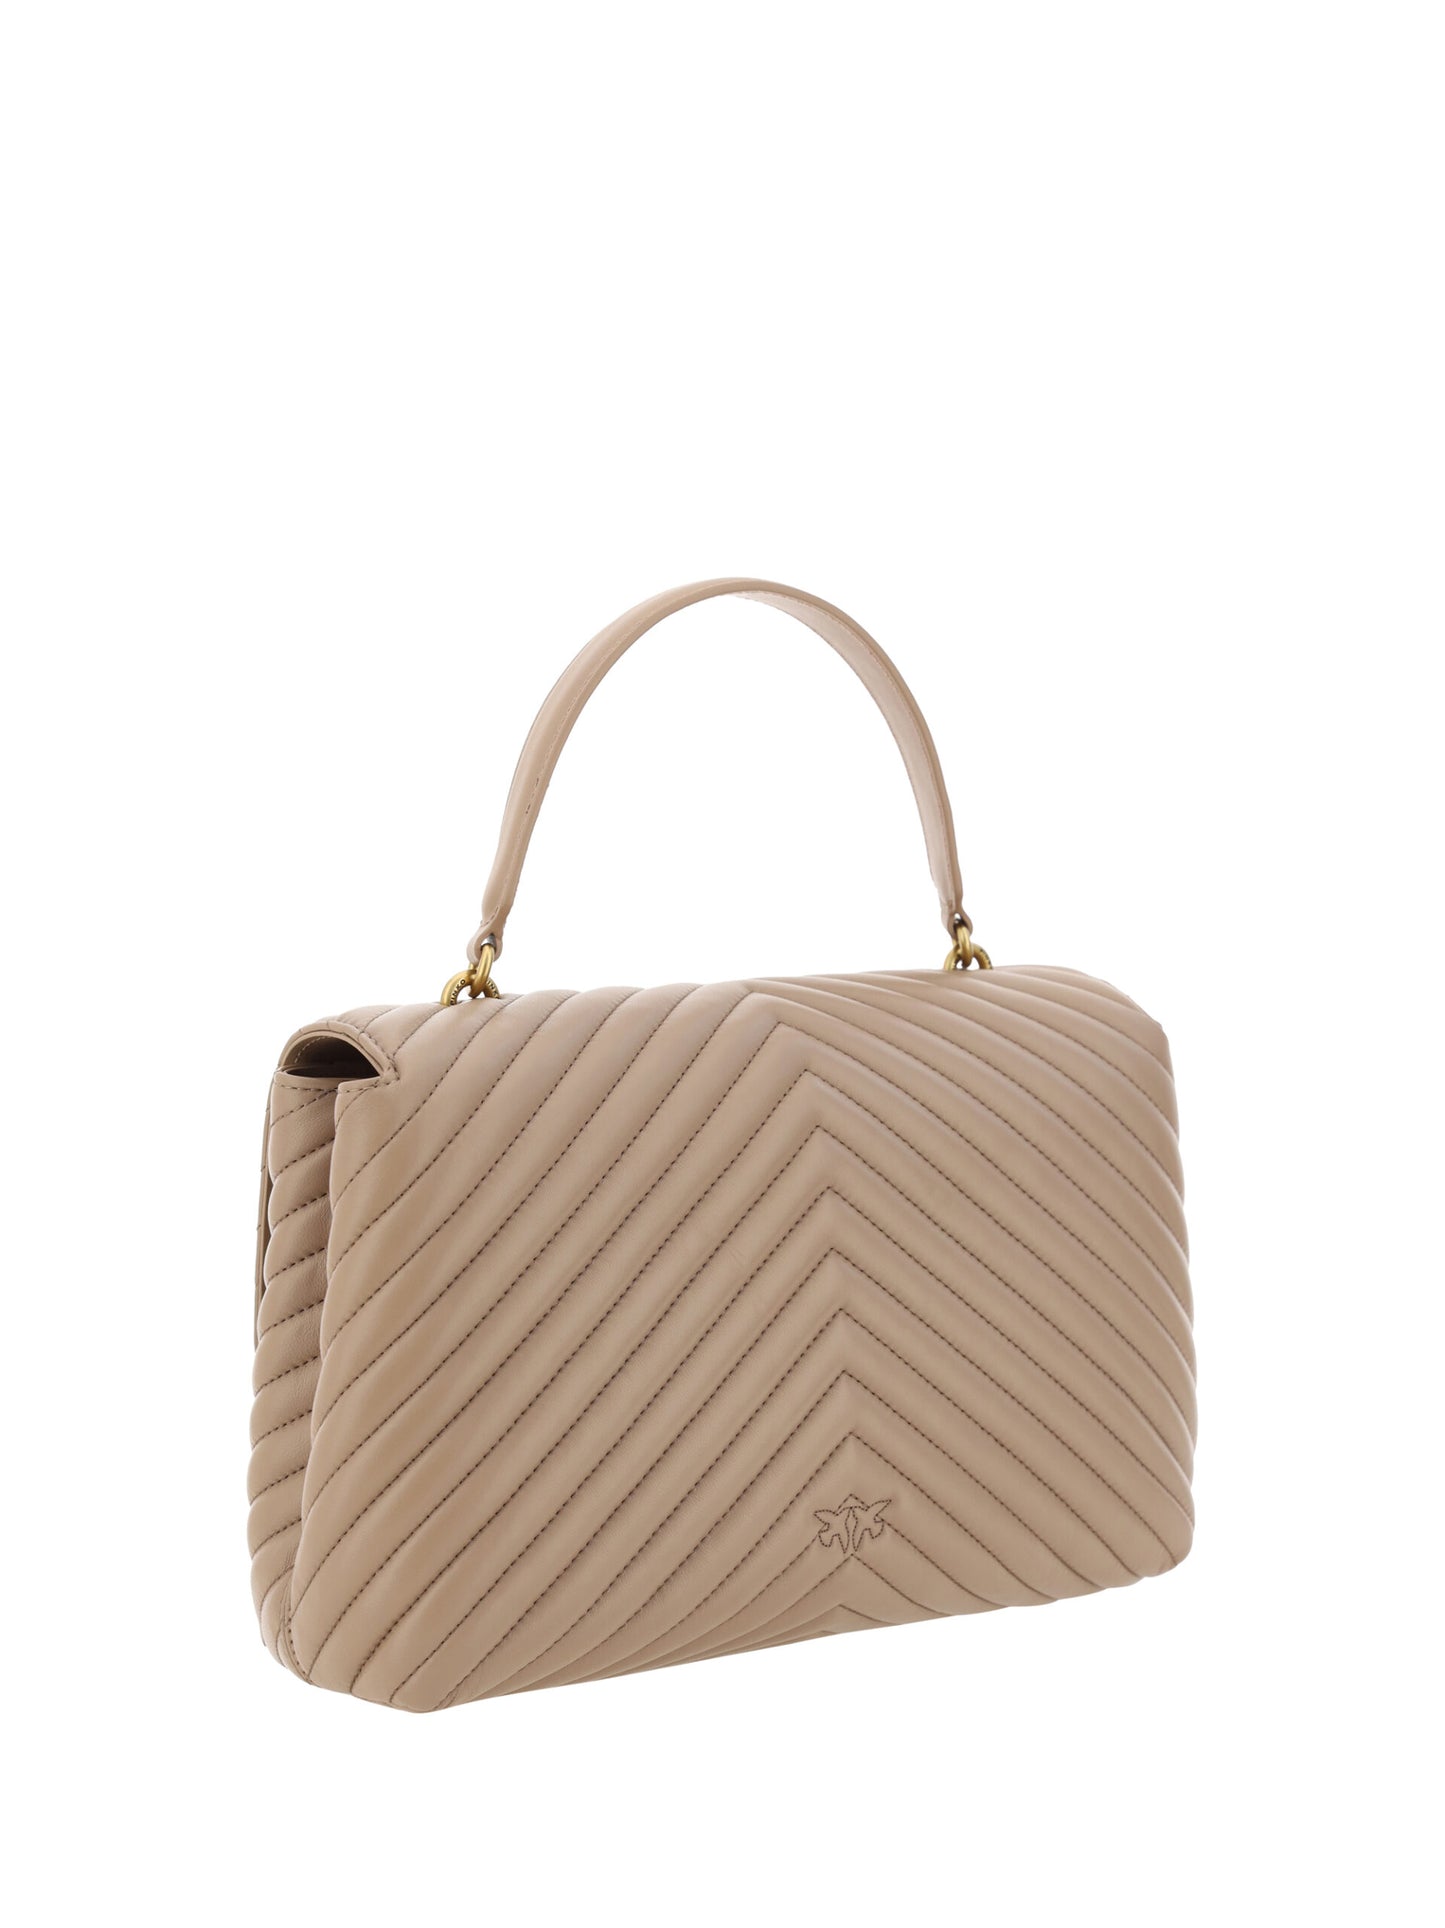 Quilted Calfskin Love Lady Bag in Beige